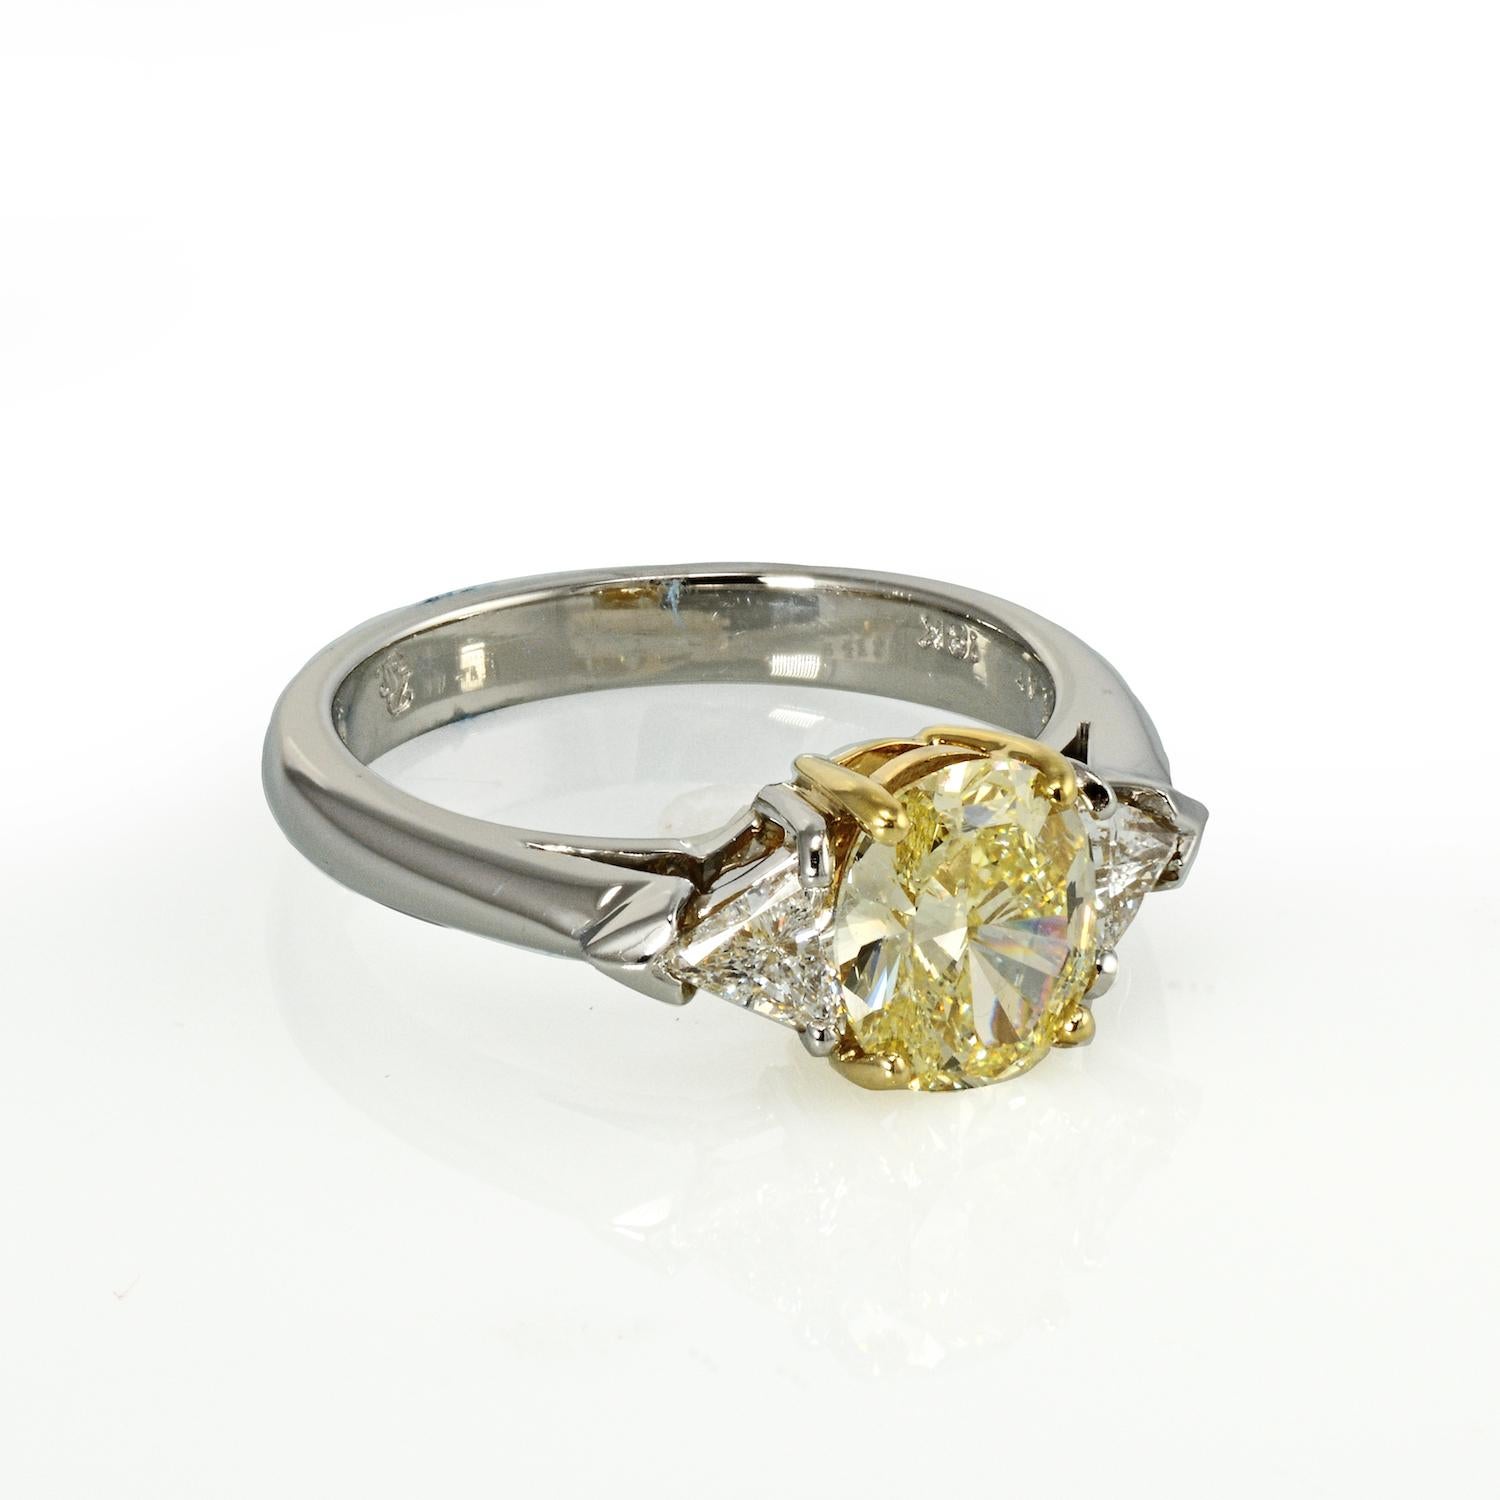 Ladies beautiful platinum and 18kt yellow gold three stone diamond ring featuring a 1.32 carat Oval-cut Fancy Yellow diamond. Two trilliant-cut diamonds are set on the shoulders totalling 0.37ct total weight of (VS) in clarity and (F-G) in color.